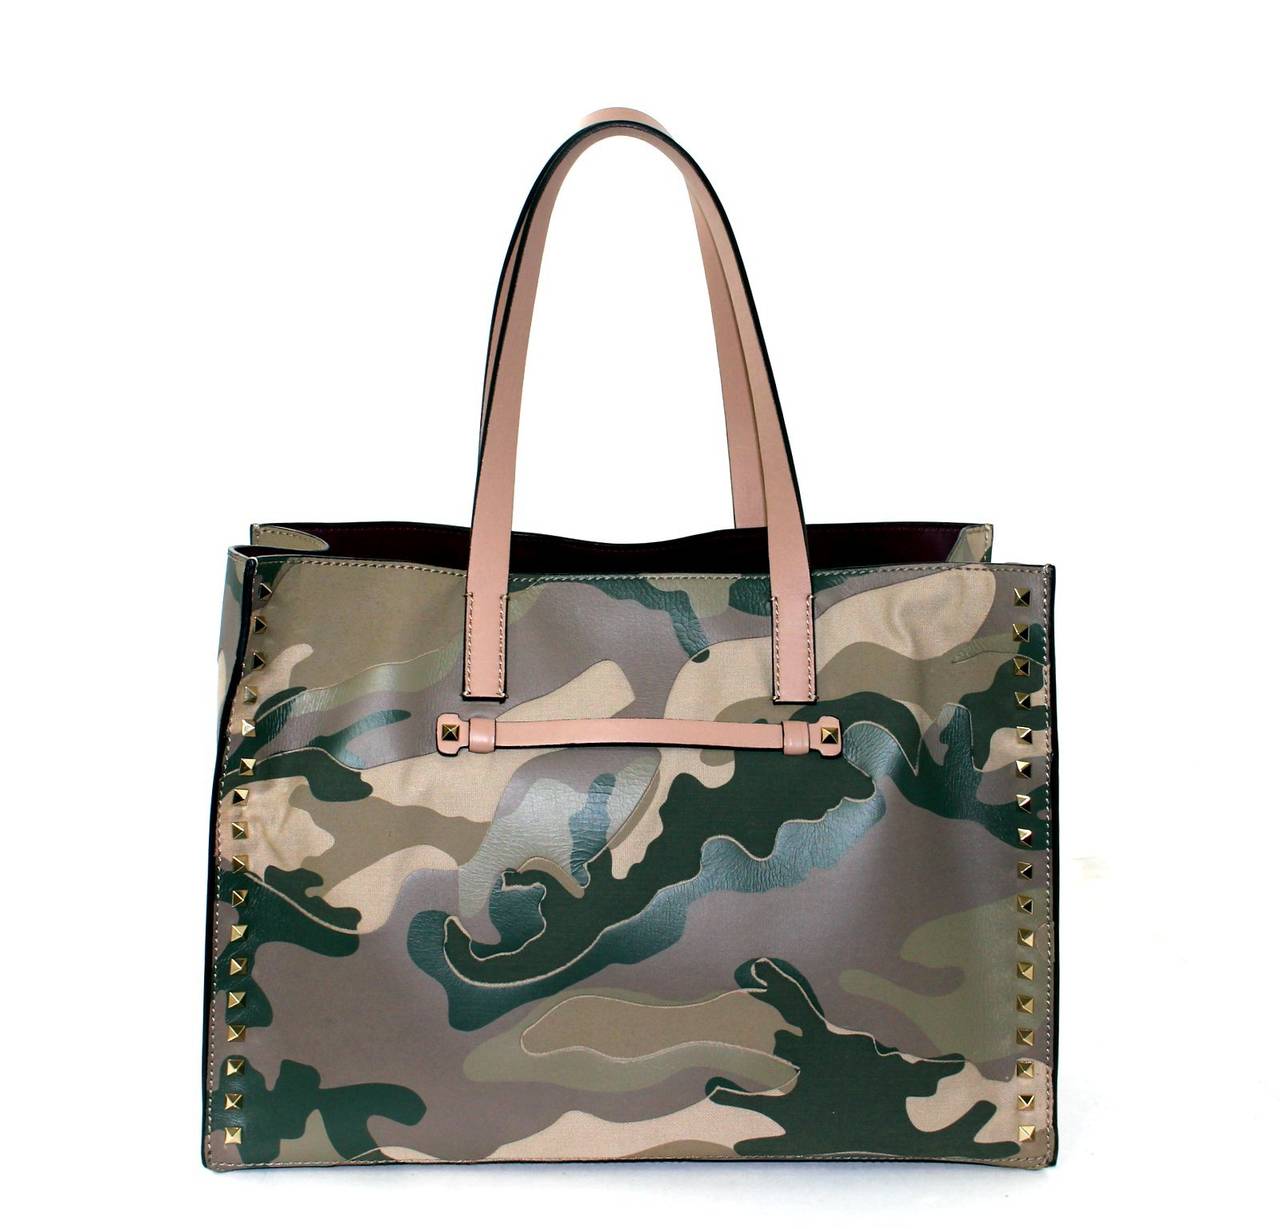 NEW Valentino Garavani Khaki Green Camo Rock Stud Tote Bag

Leather and canvas with gold tone studs
Magnetic snap closure; contrasting burgundy leather interior
Three interior zippered pockets; three open pockets
Beige leather straps carried on